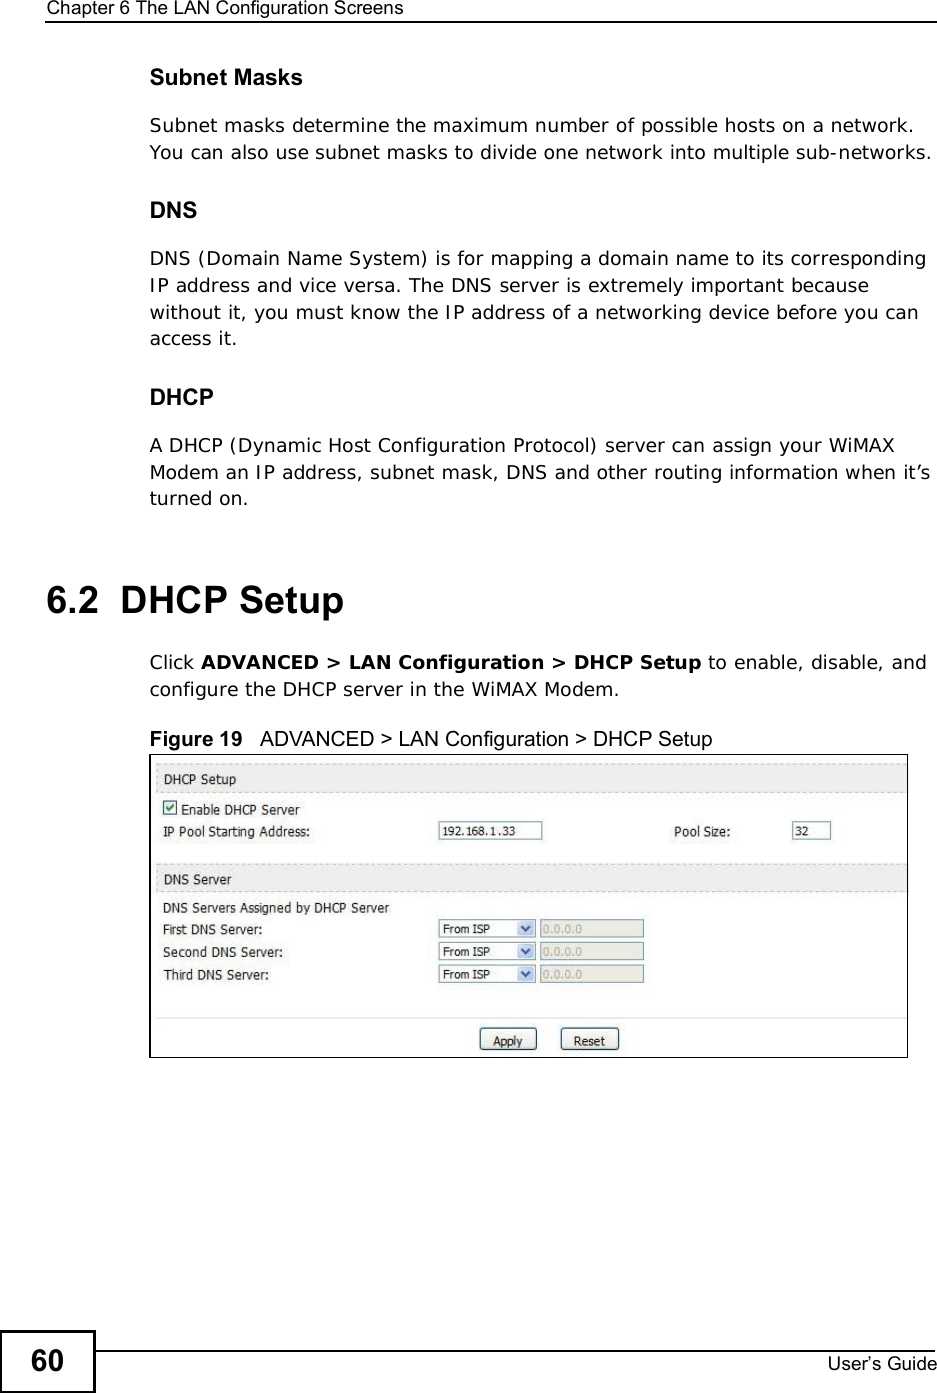 Chapter 6The LAN Configuration ScreensUser s Guide60Subnet MasksSubnet masks determine the maximum number of possible hosts on a network. You can also use subnet masks to divide one network into multiple sub-networks.DNSDNS (Domain Name System) is for mapping a domain name to its corresponding IP address and vice versa. The DNS server is extremely important because without it, you must know the IP address of a networking device before you can access it.DHCPA DHCP (Dynamic Host Configuration Protocol) server can assign your WiMAX Modem an IP address, subnet mask, DNS and other routing information when it’s turned on.6.2  DHCP SetupClick ADVANCED &gt; LAN Configuration &gt; DHCP Setup to enable, disable, and configure the DHCP server in the WiMAX Modem.Figure 19   ADVANCED &gt; LAN Configuration &gt; DHCP Setup